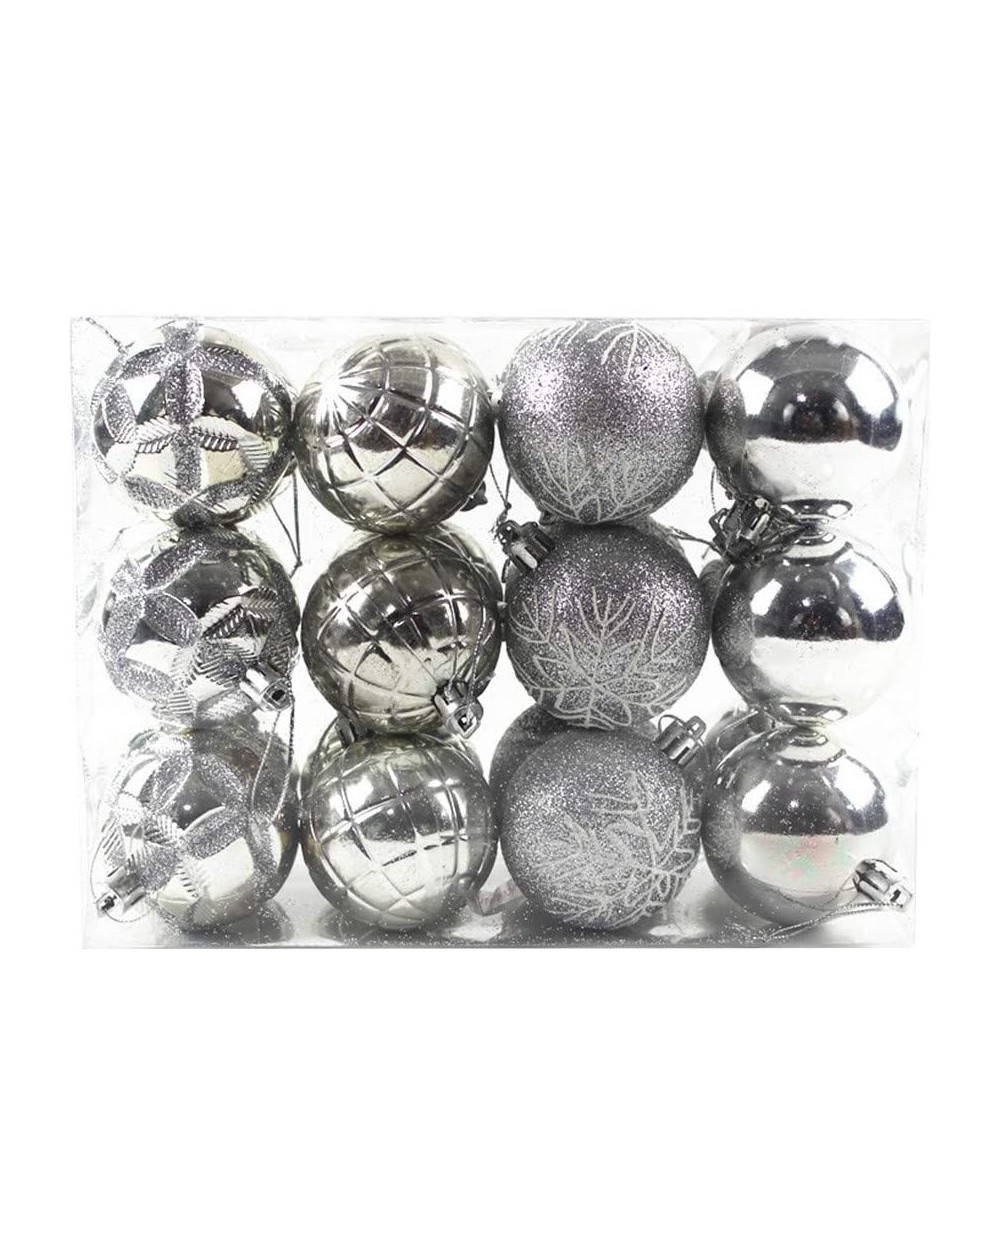 Ornaments 24 Pcs Christmas Ball Ornaments Shatterproof Christmas Decorations Tree Balls for Holiday Wedding Party Decoration-...